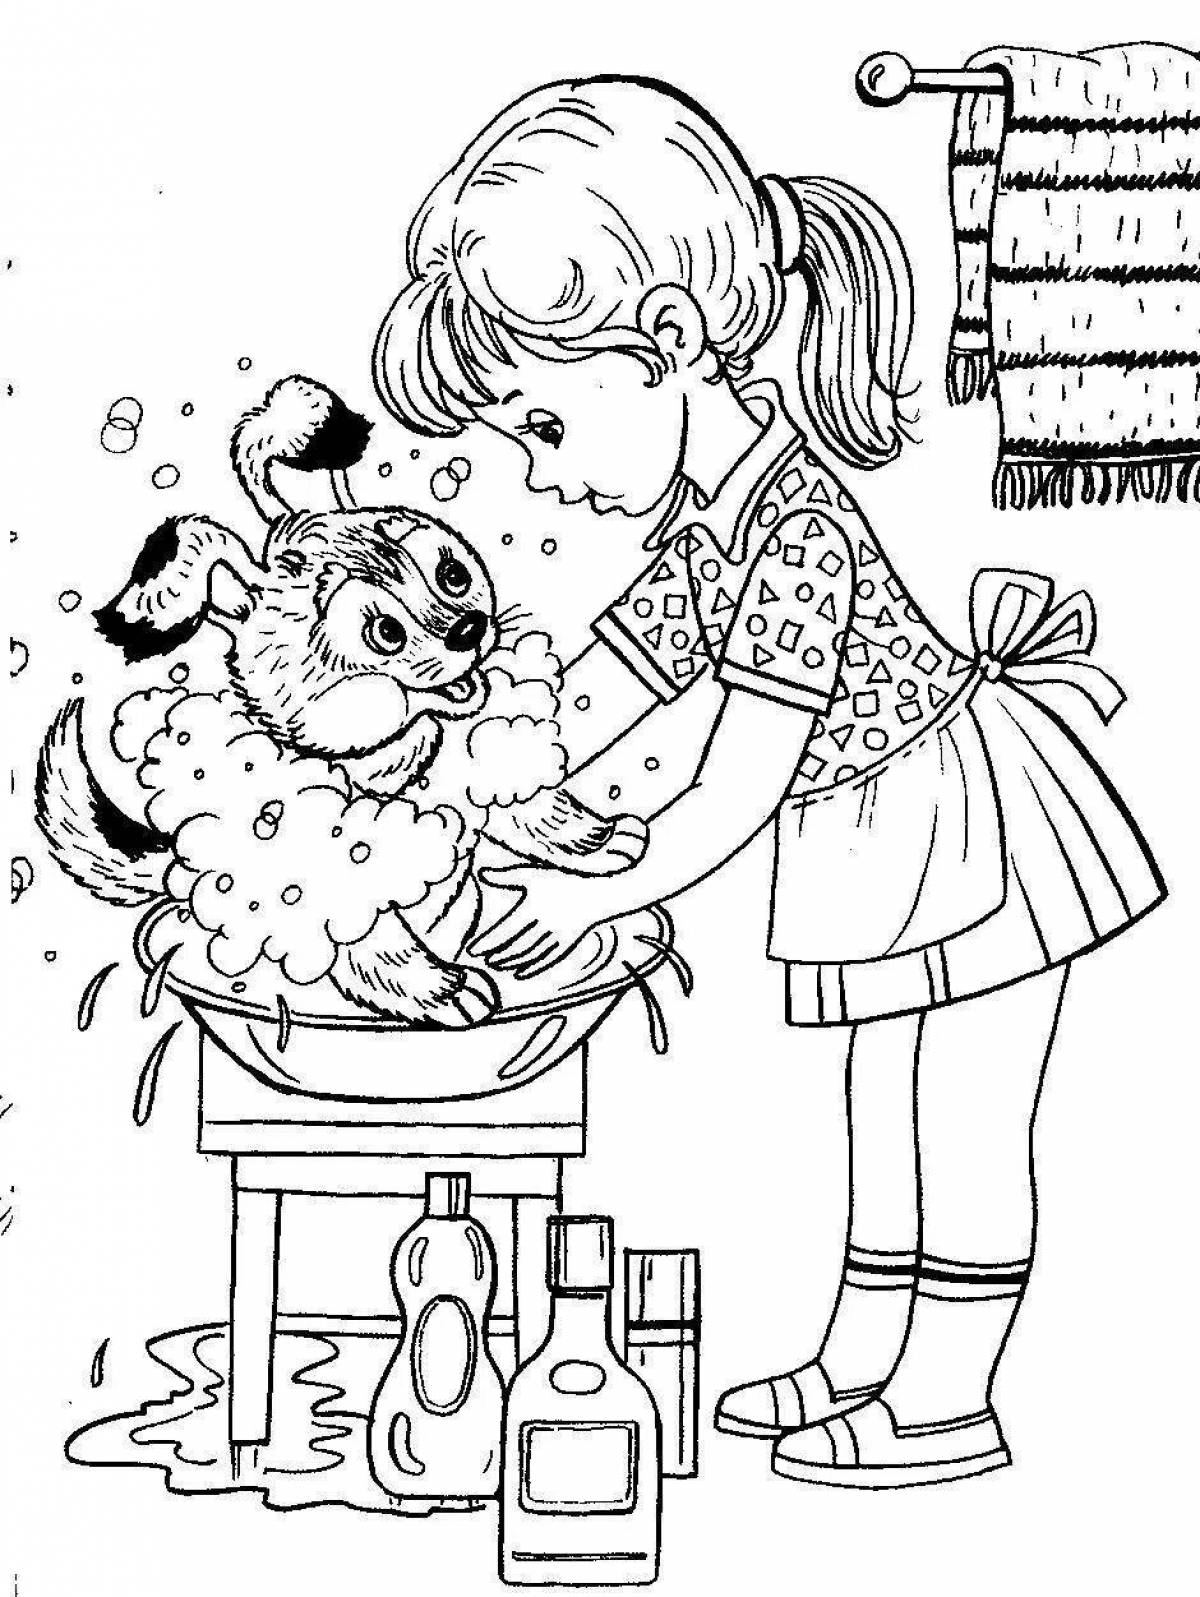 Exciting good deeds coloring page